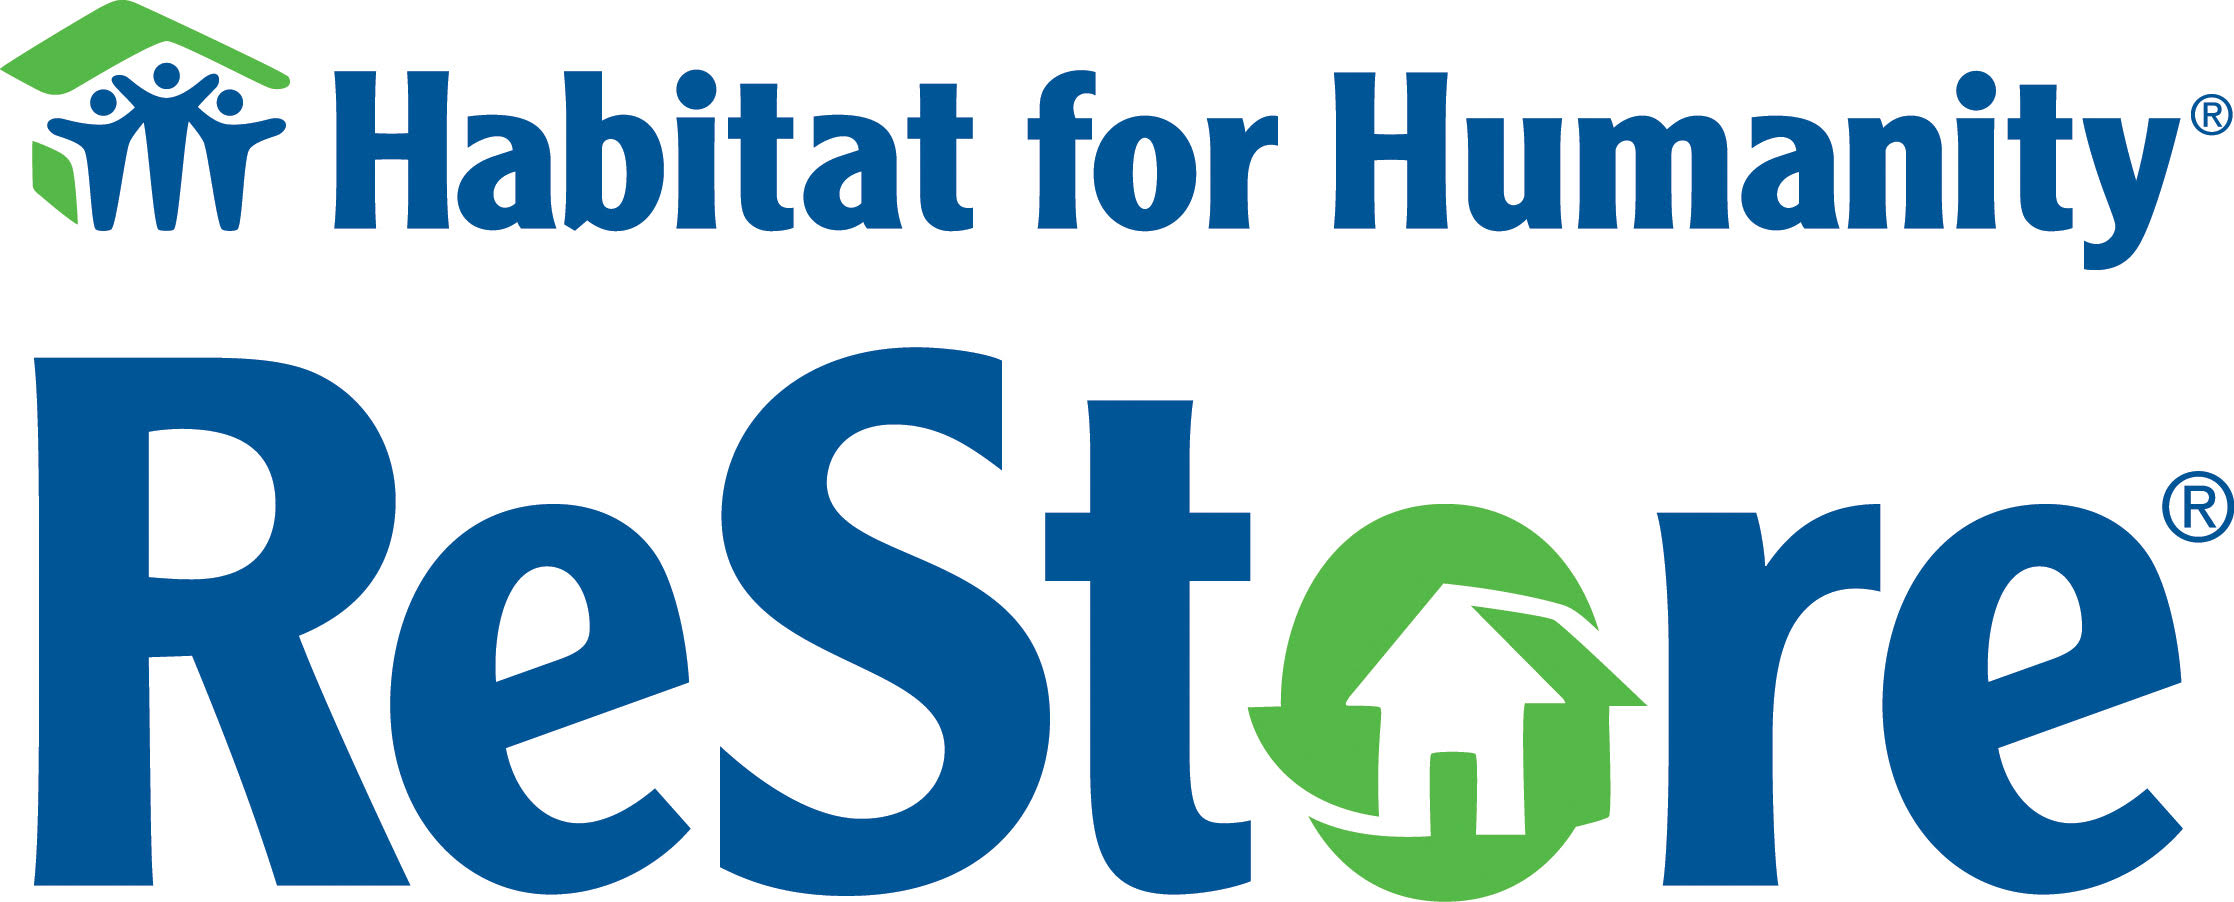 Habitat for Humanity ReStore ***STUDENTS ONLY*** logo